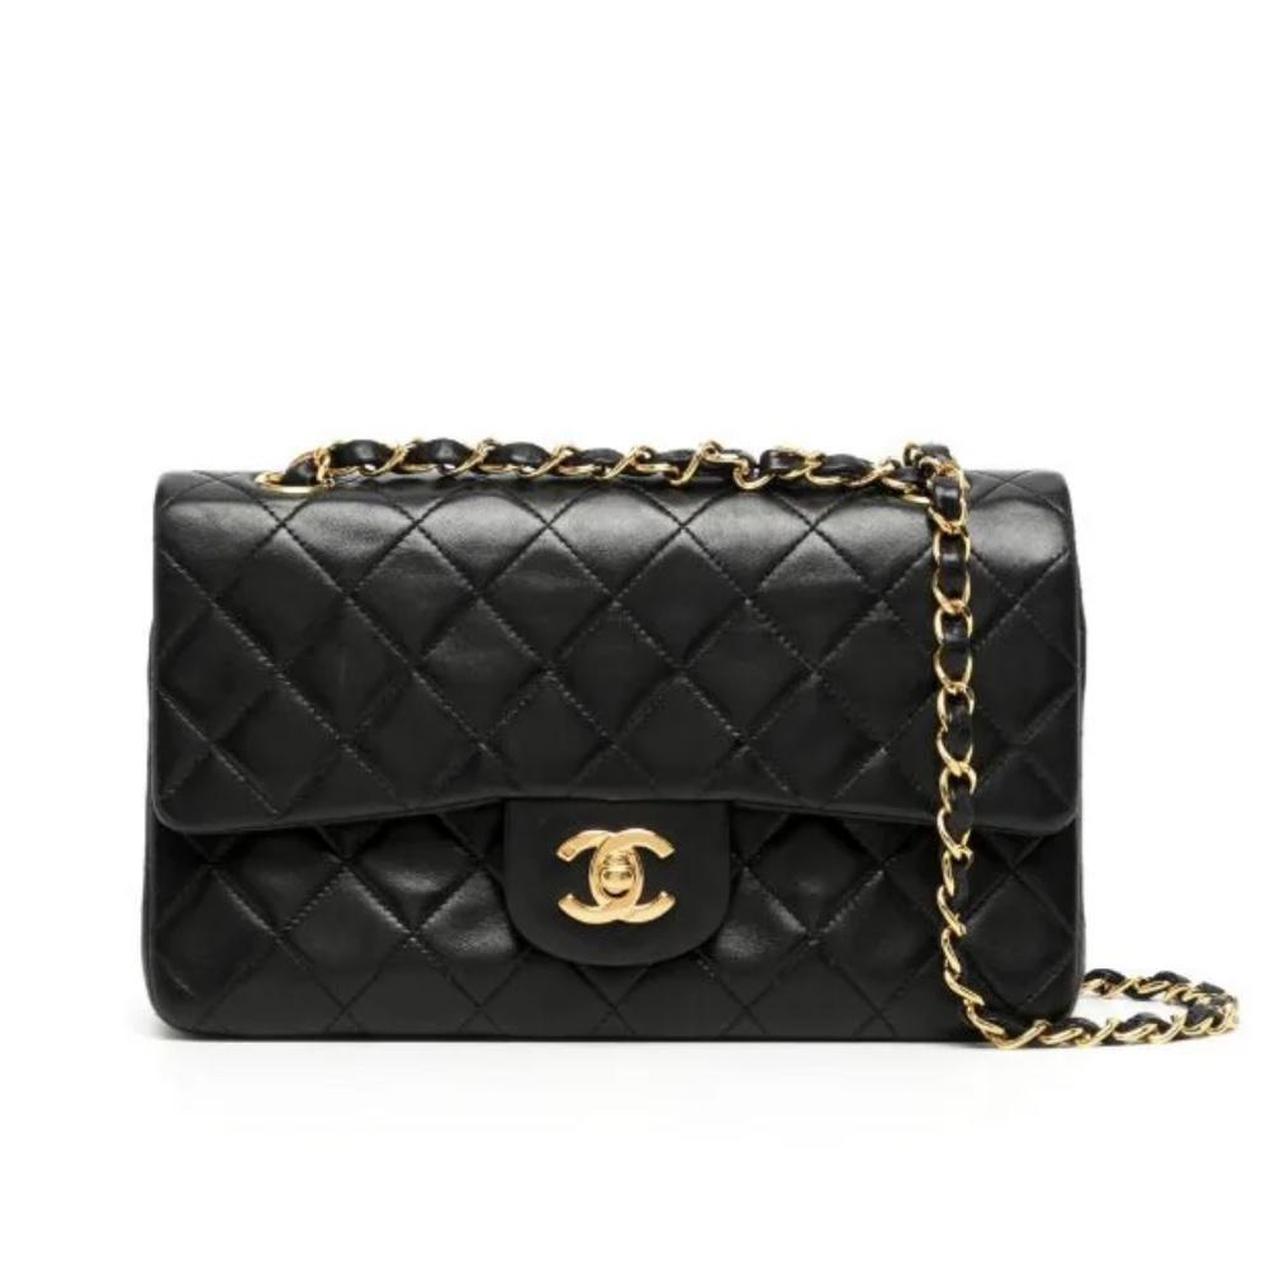 free chanel bag with purchase